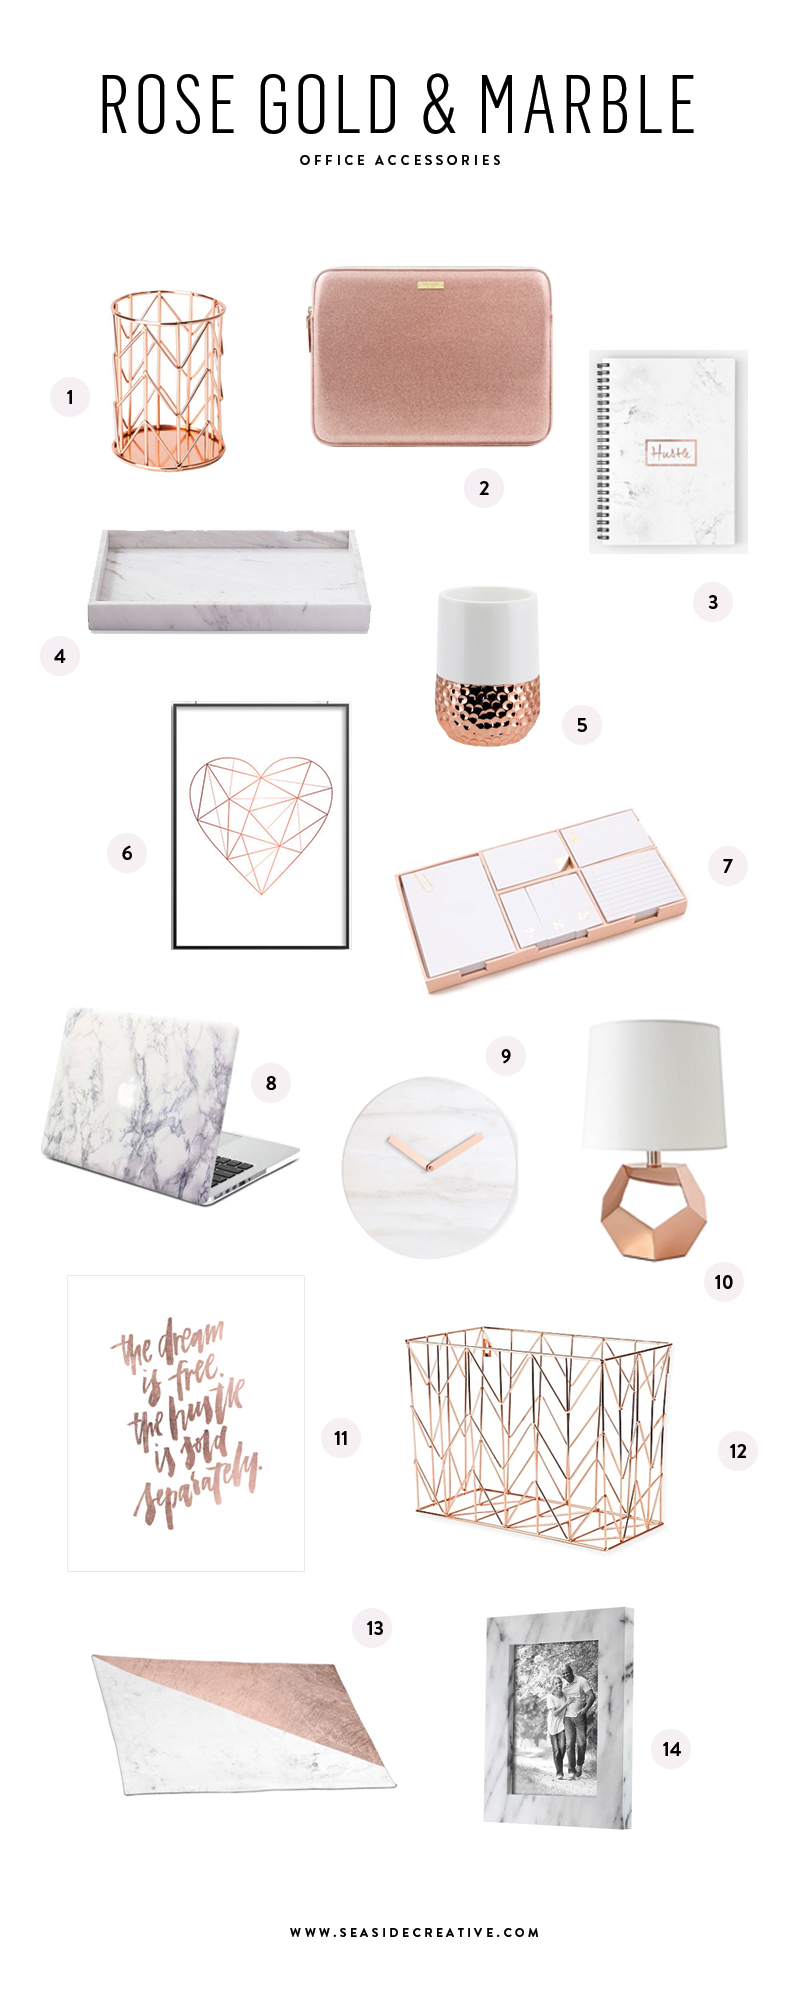 office saltwater rose gold